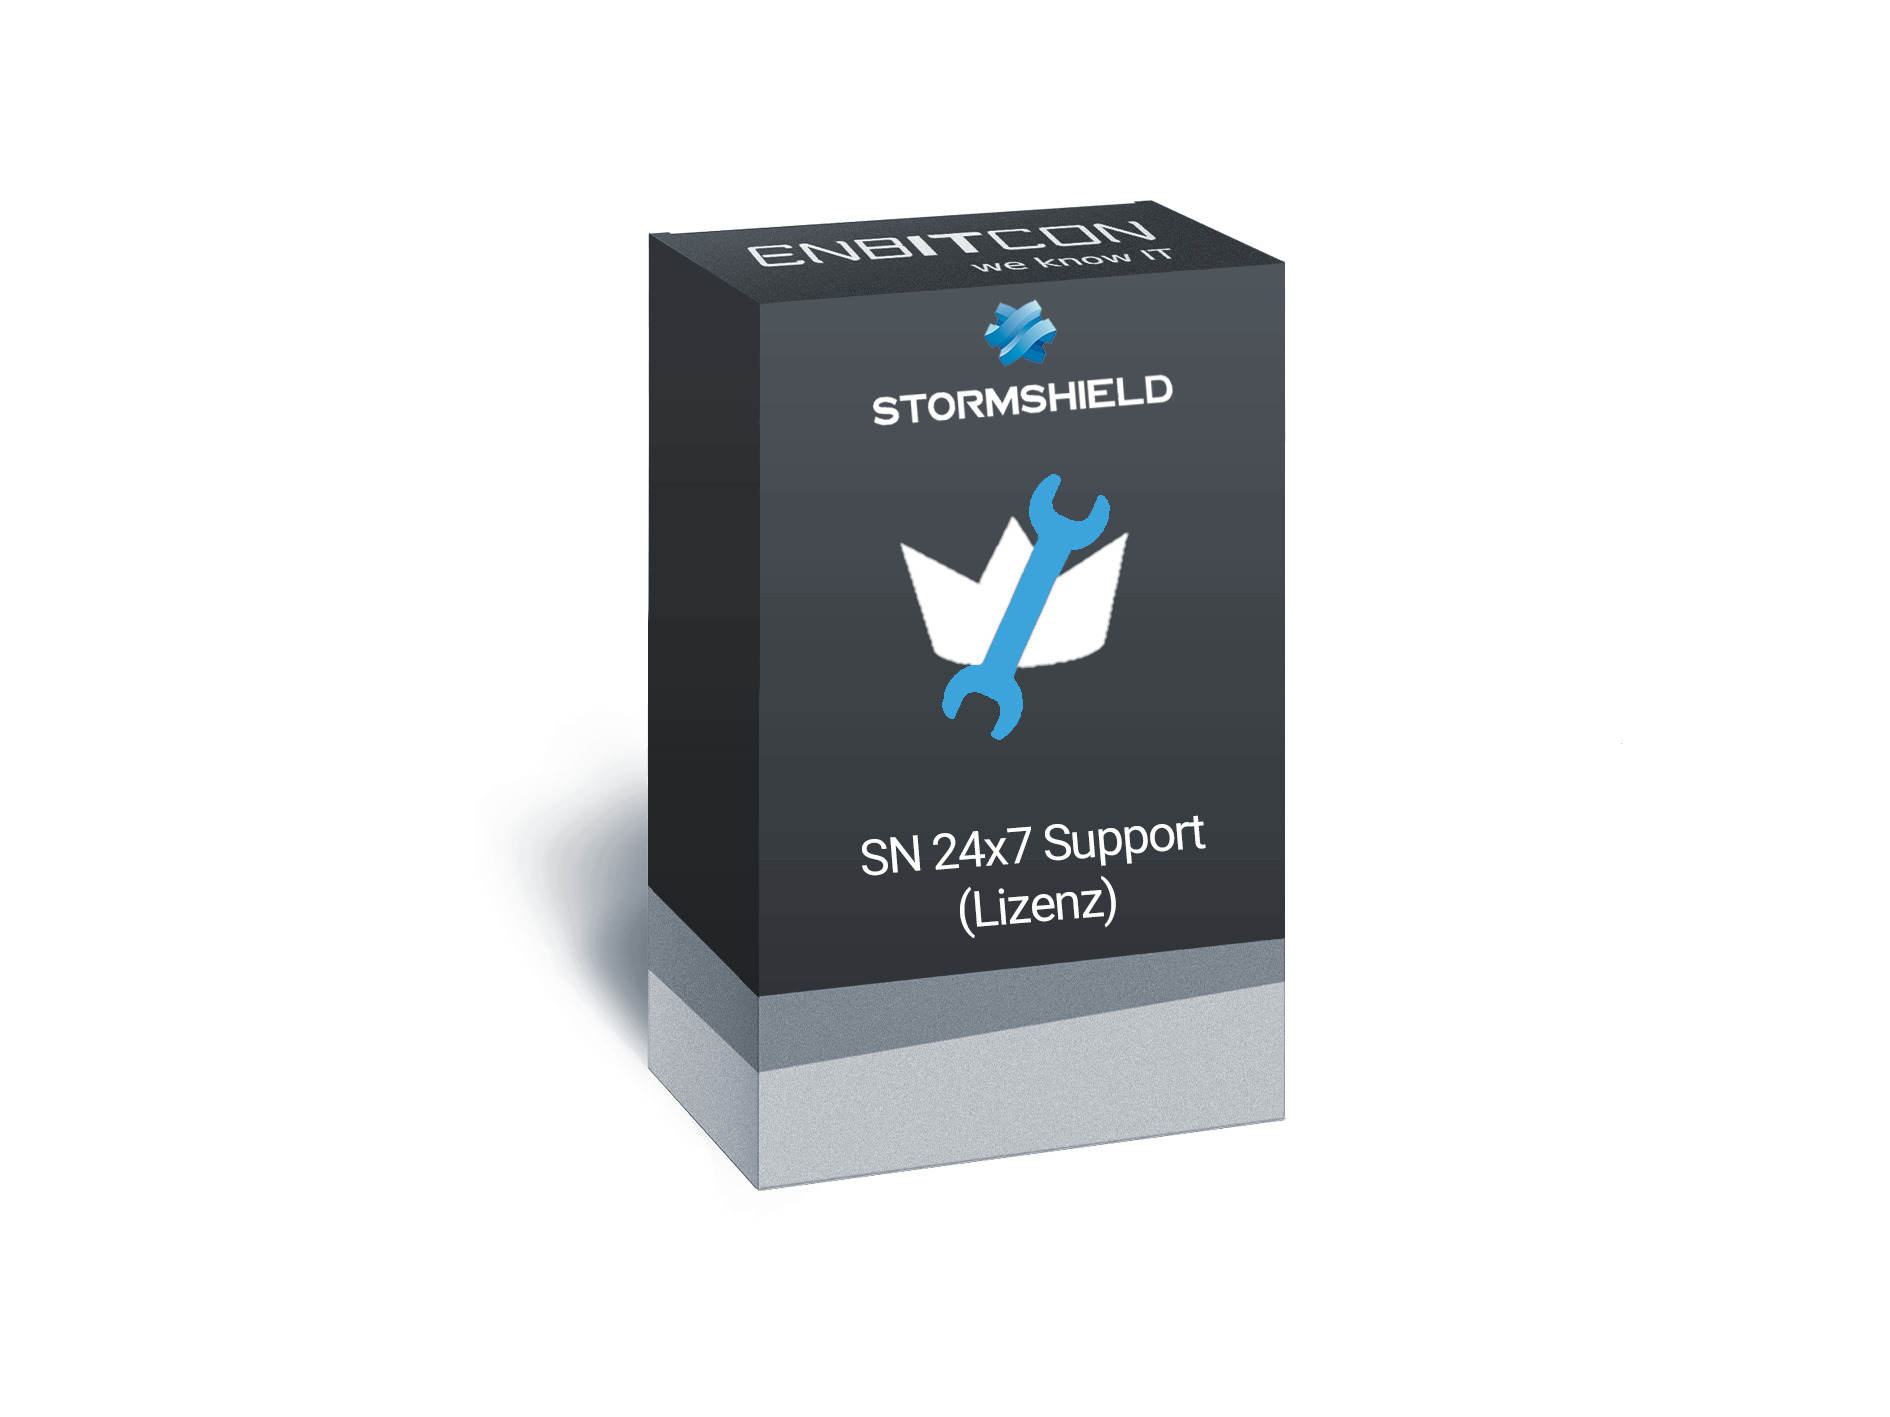 Stormshield SN210 24x7 Support